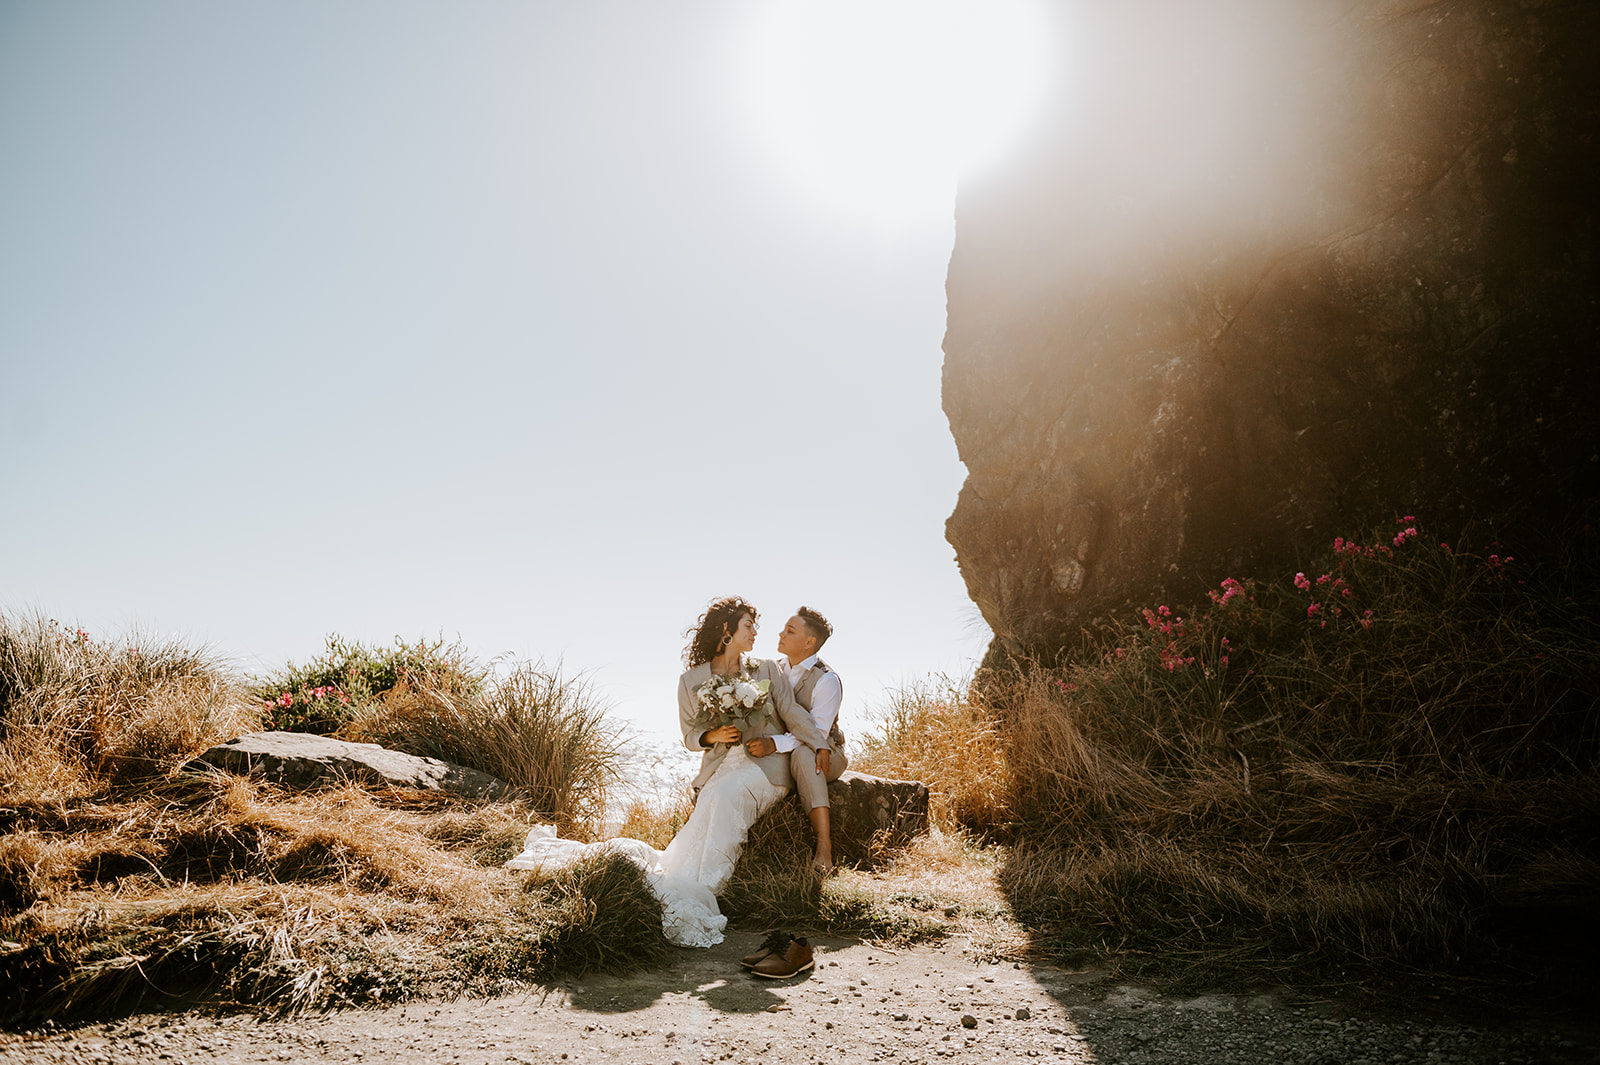 Two brides kissing at kissing rock on the Oregon coast With the beach in the background At sunset